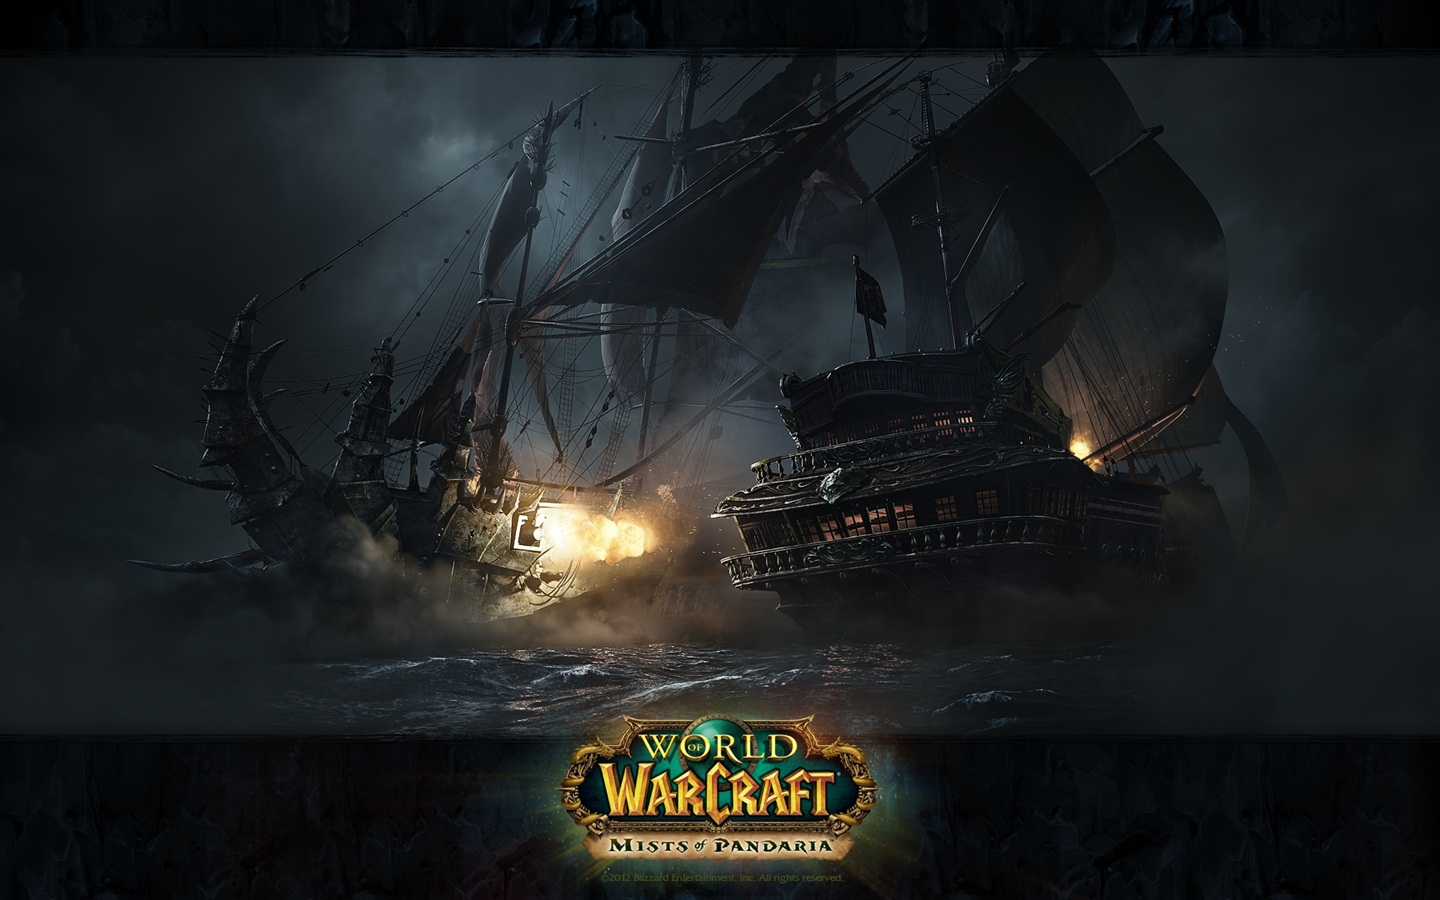 World of Warcraft: Mists of Pandaria HD wallpapers #5 - 1440x900